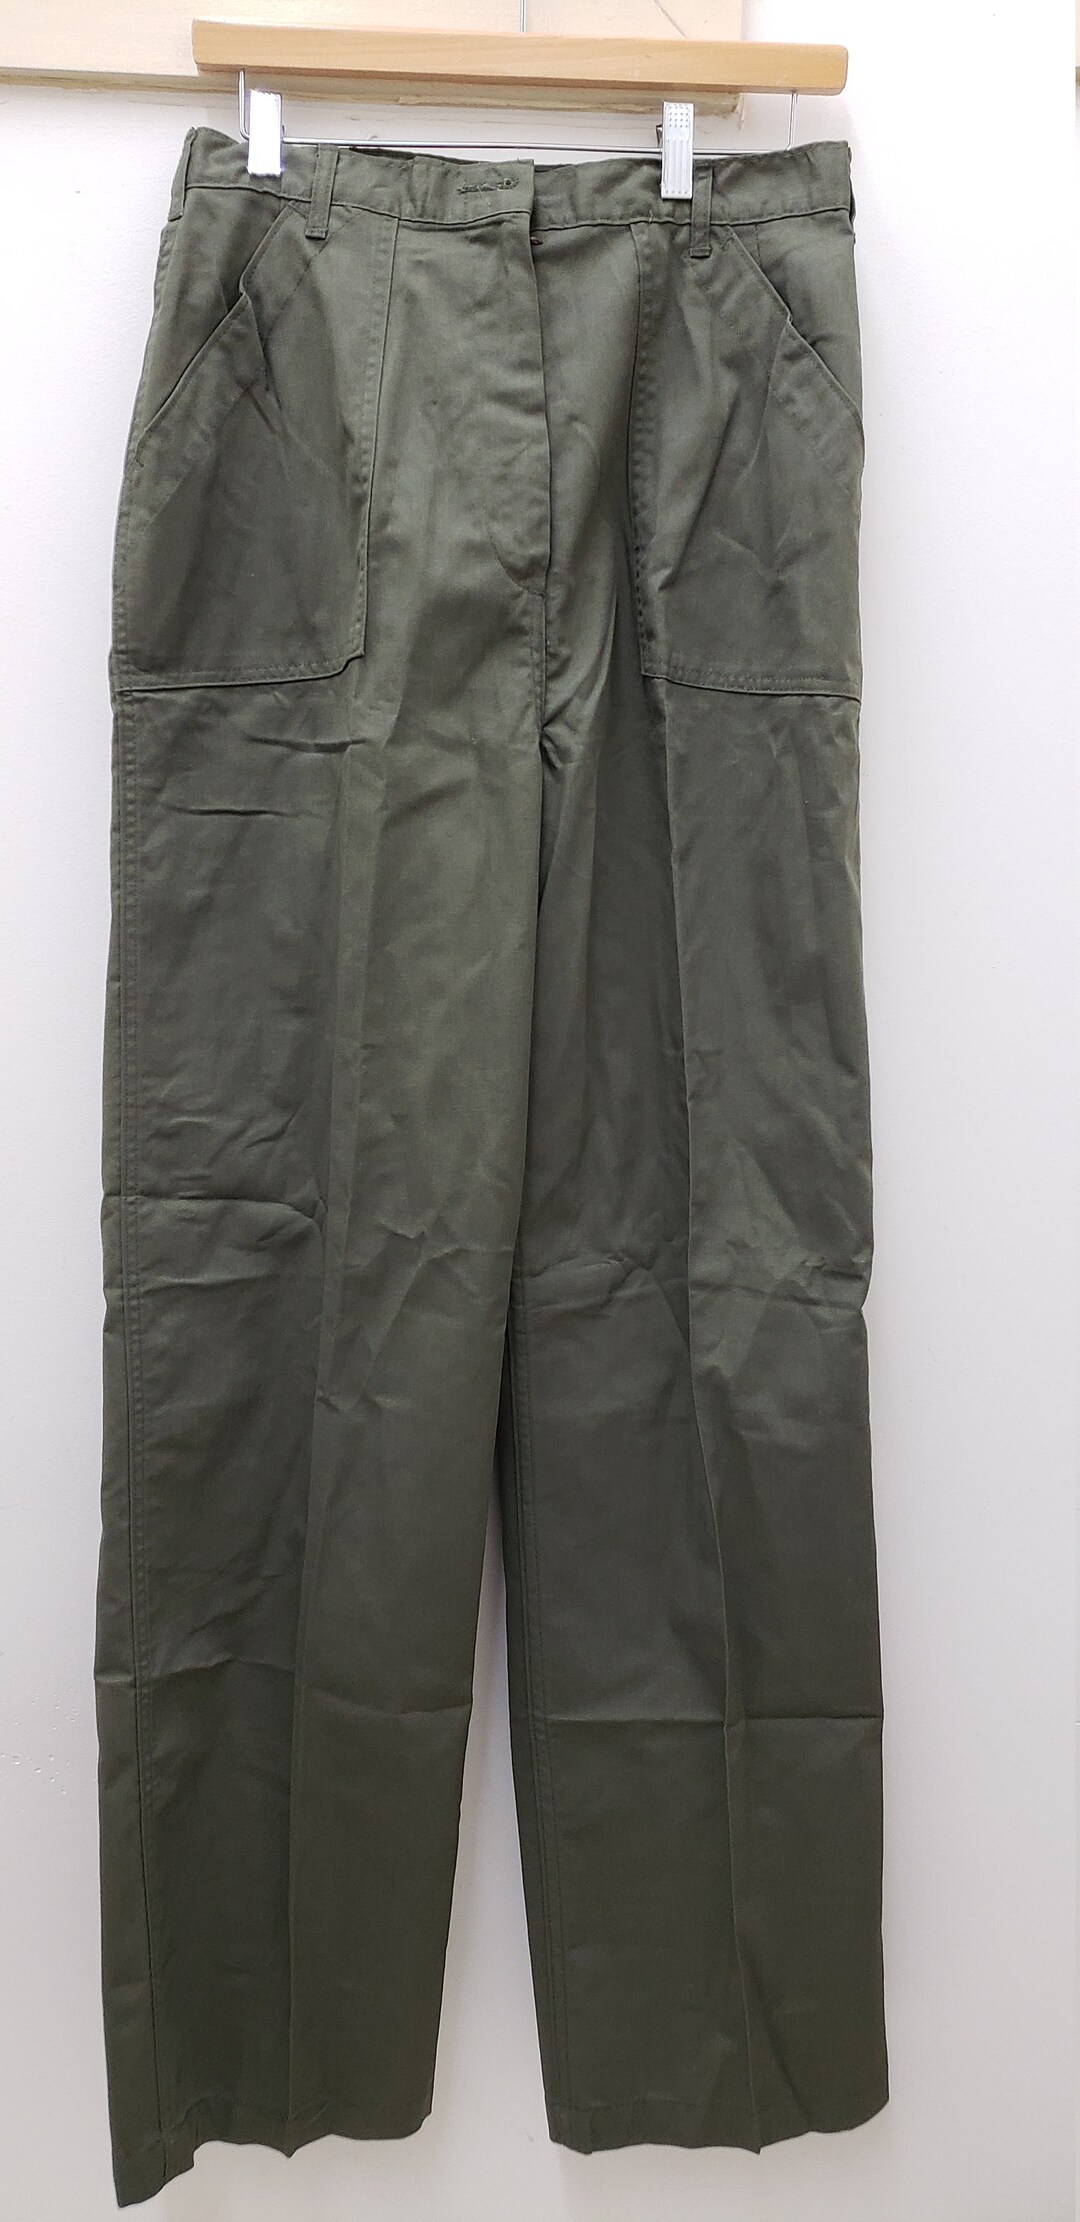 Vintage Military Issued Woman's Utility Trousers-18xl33 - Etsy